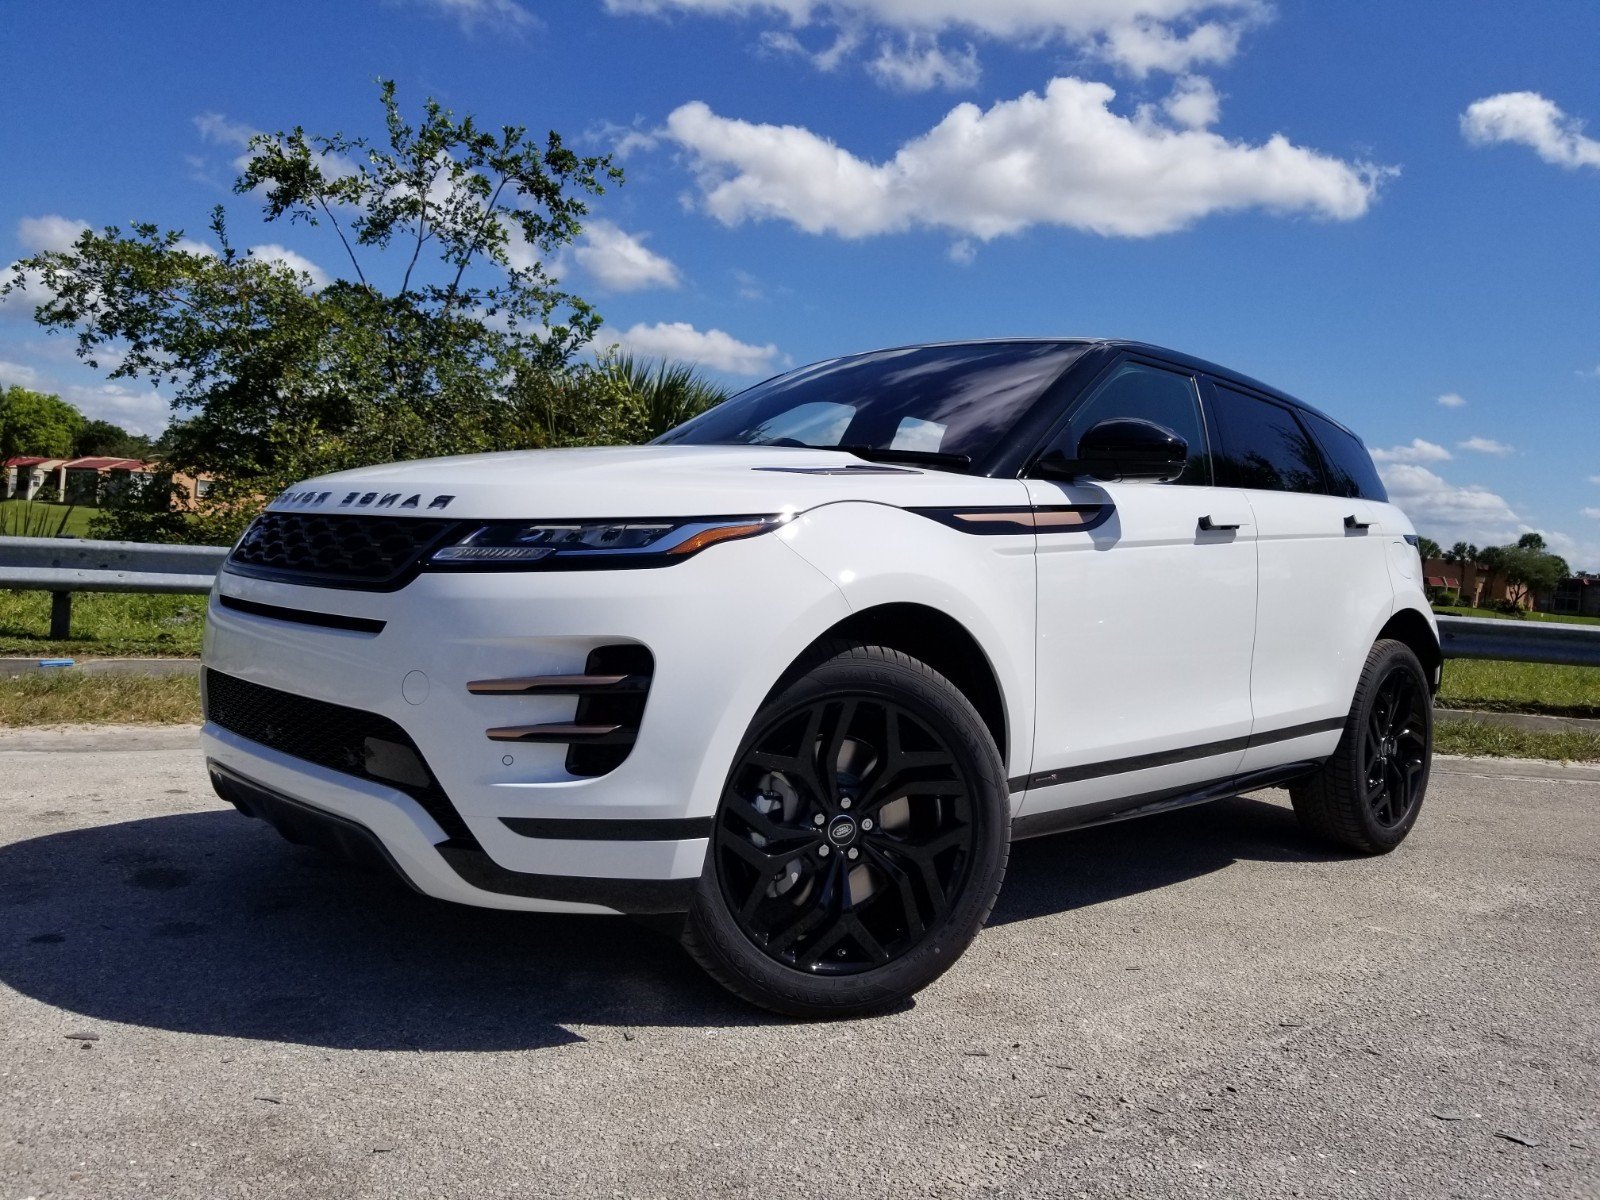 New 2020 Land Rover Range Rover Evoque R Dynamic S With Navigation Awd